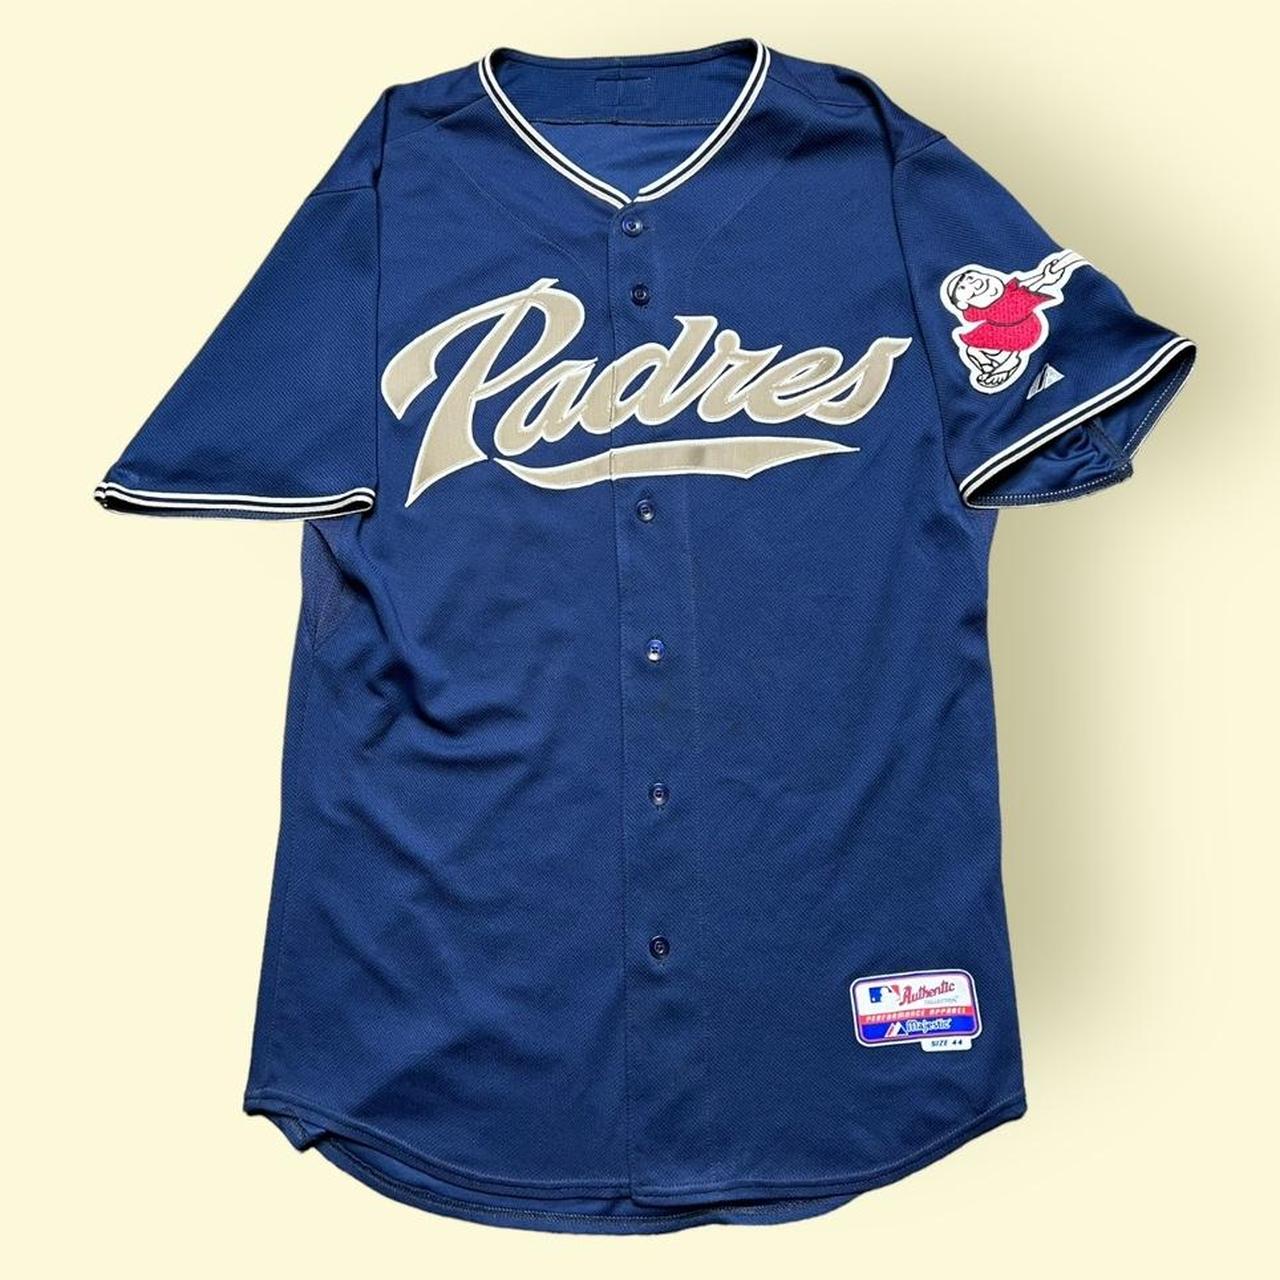 Men's San Diego Padres Majestic Navy Team Authentic Jersey